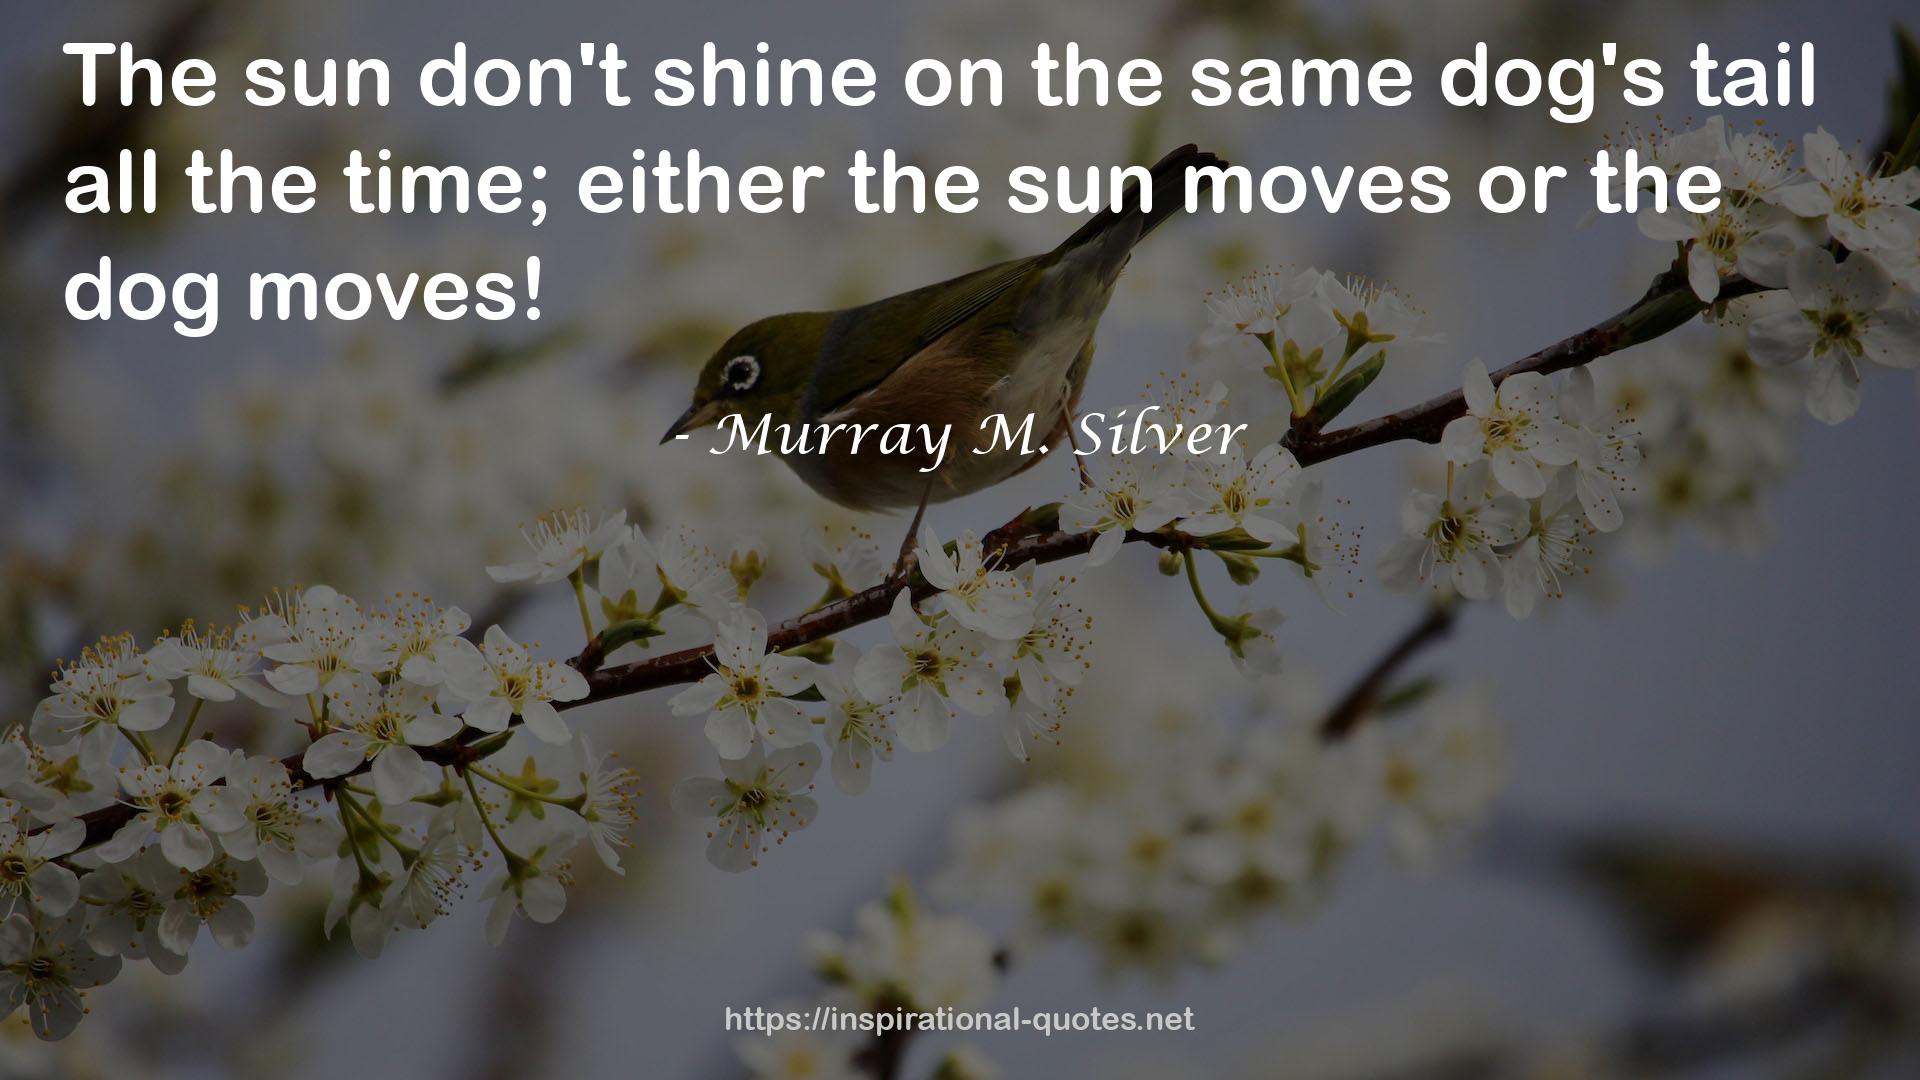 Murray M. Silver QUOTES